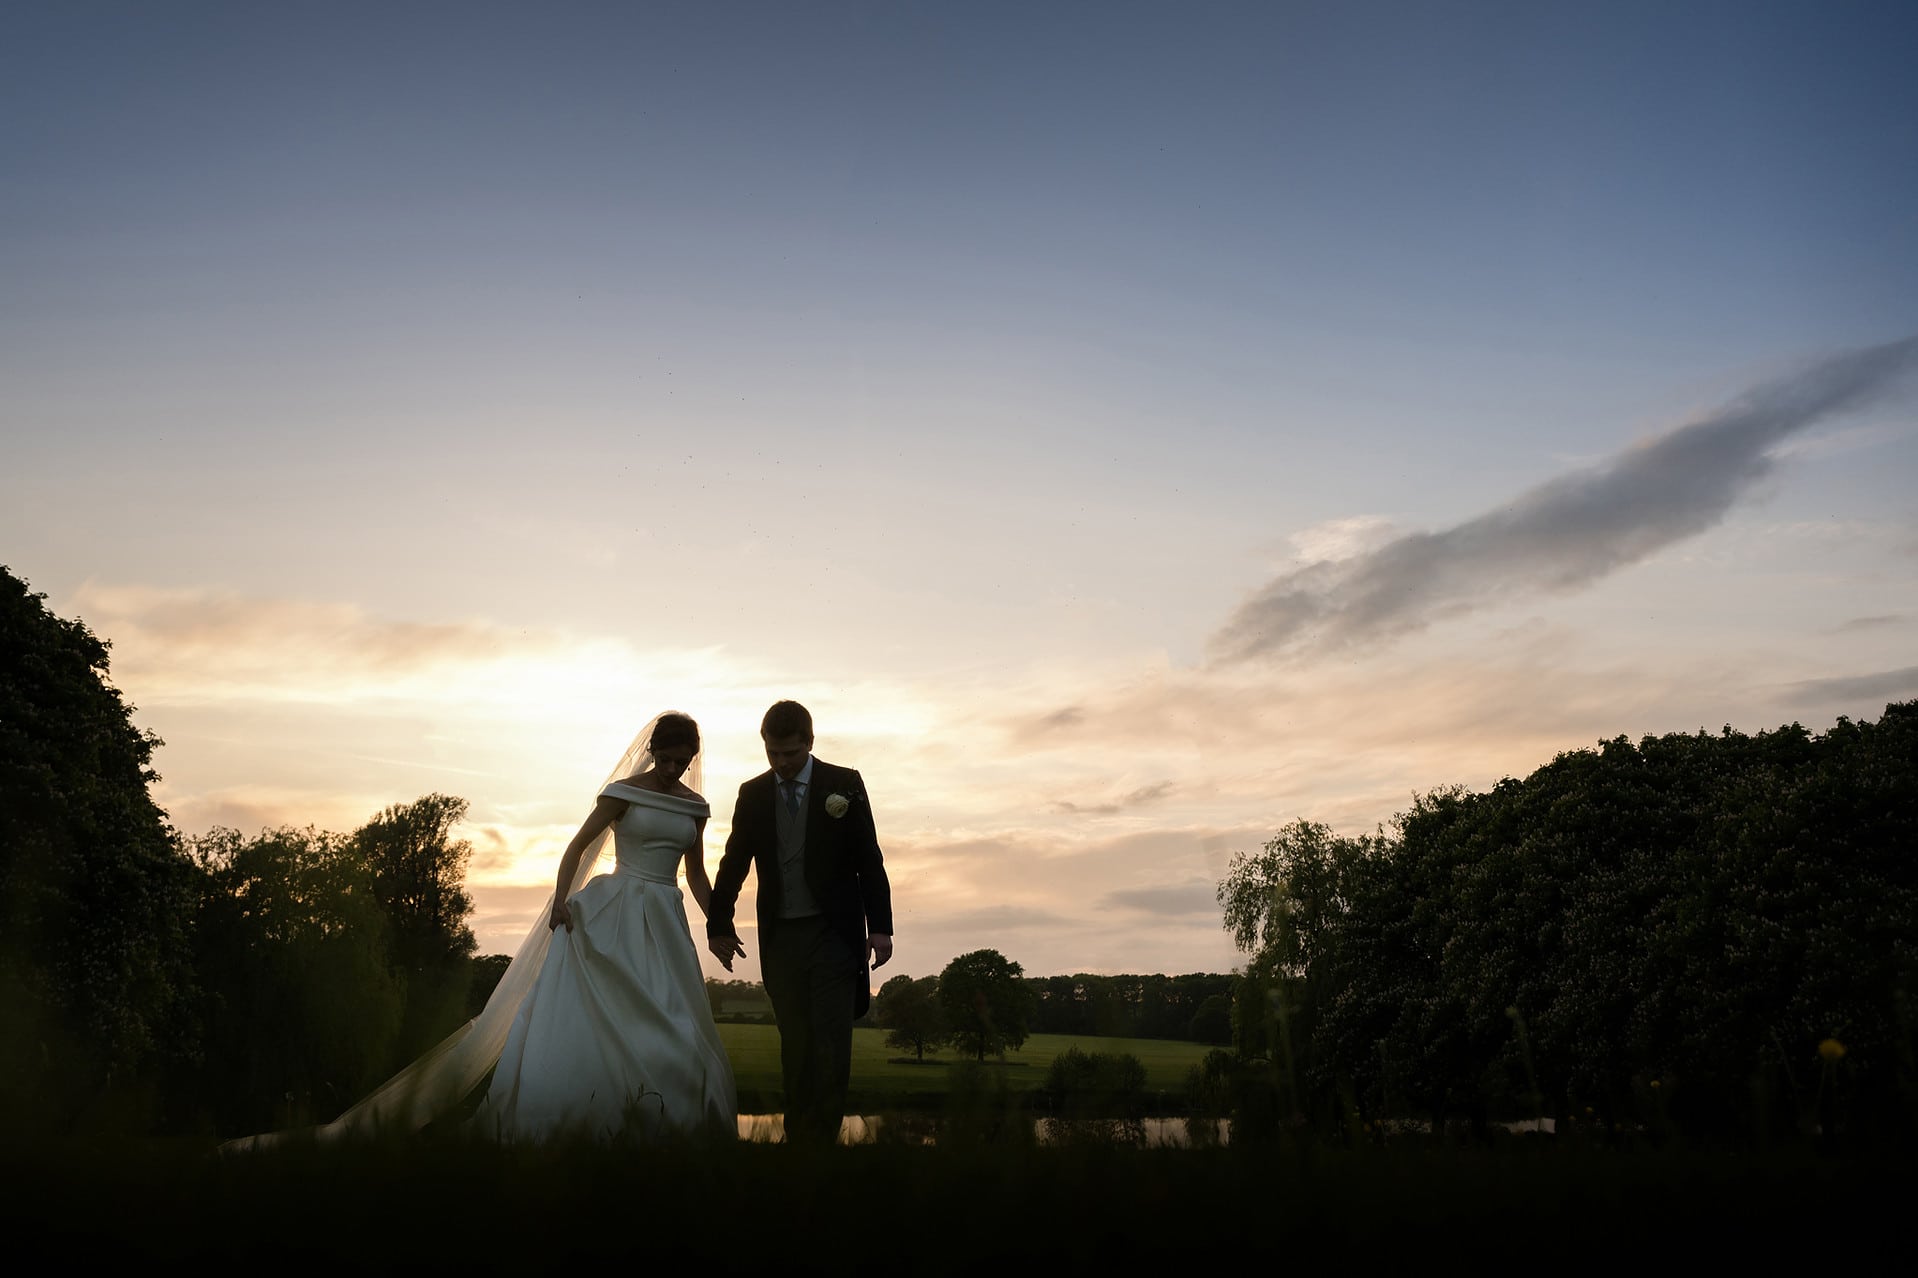 A semil-silhouette of the bride and groom walking by the lake at Kelmarsh Hall at sunset